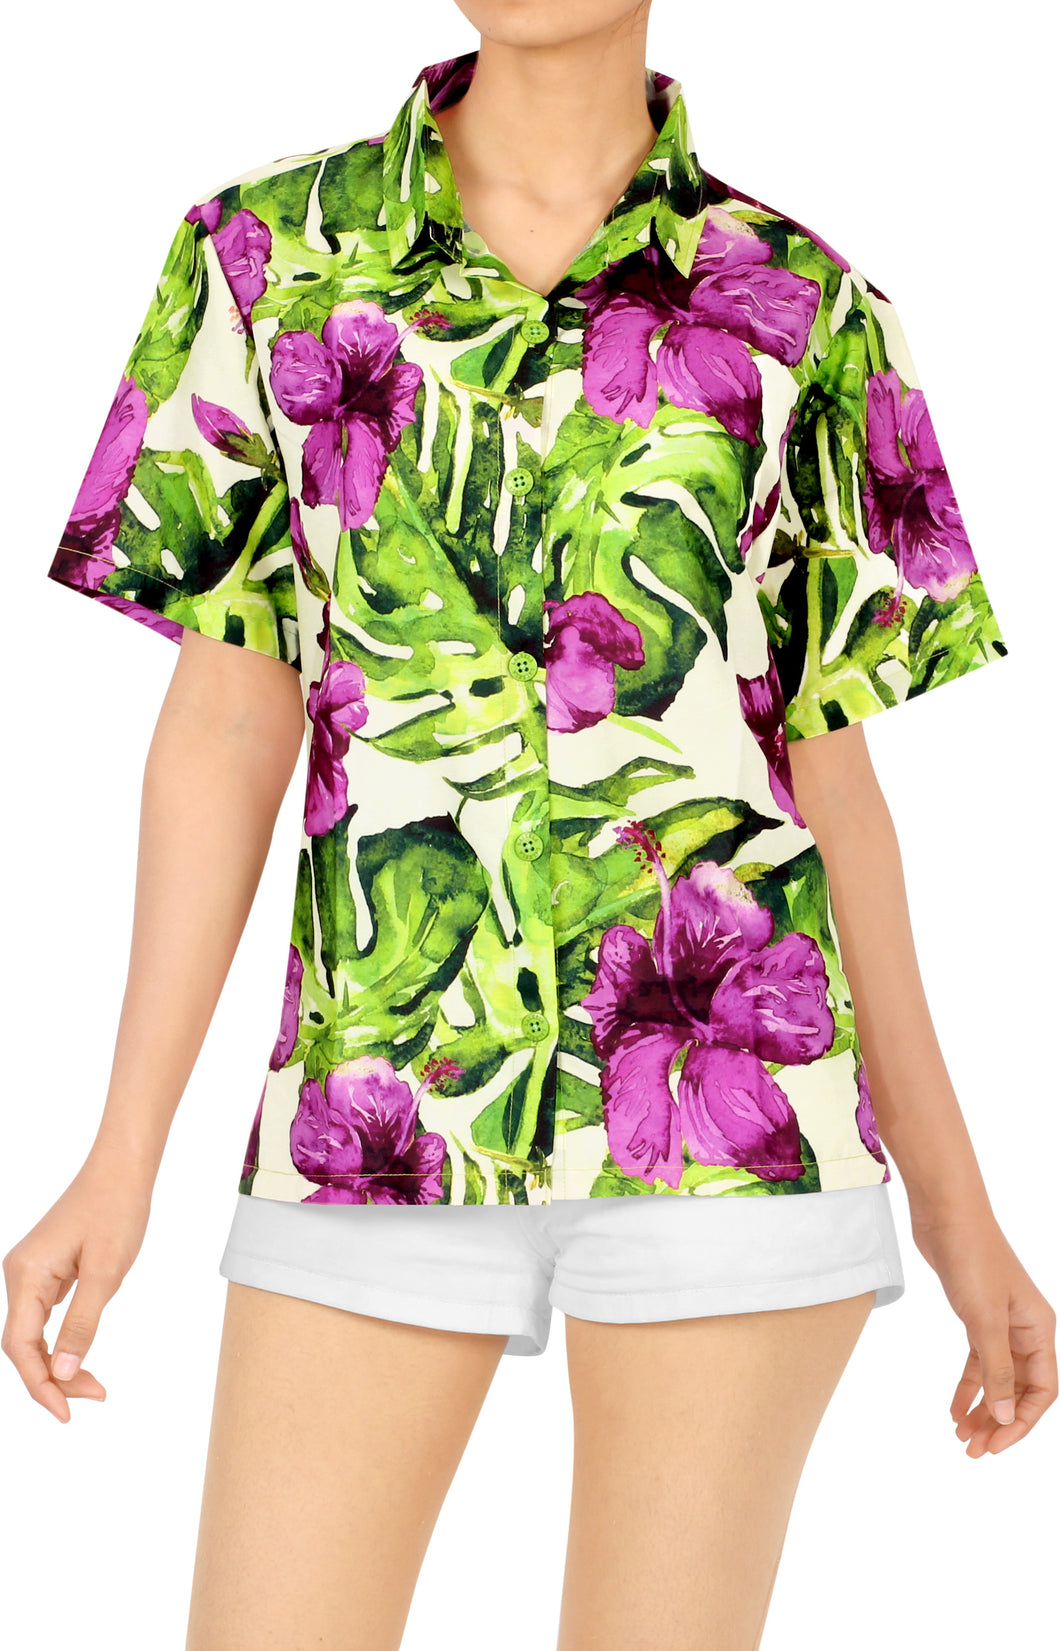 Multicolor Monstera Leaves and Hisbiscus Flower Printed Hawaiian Shirt For Women